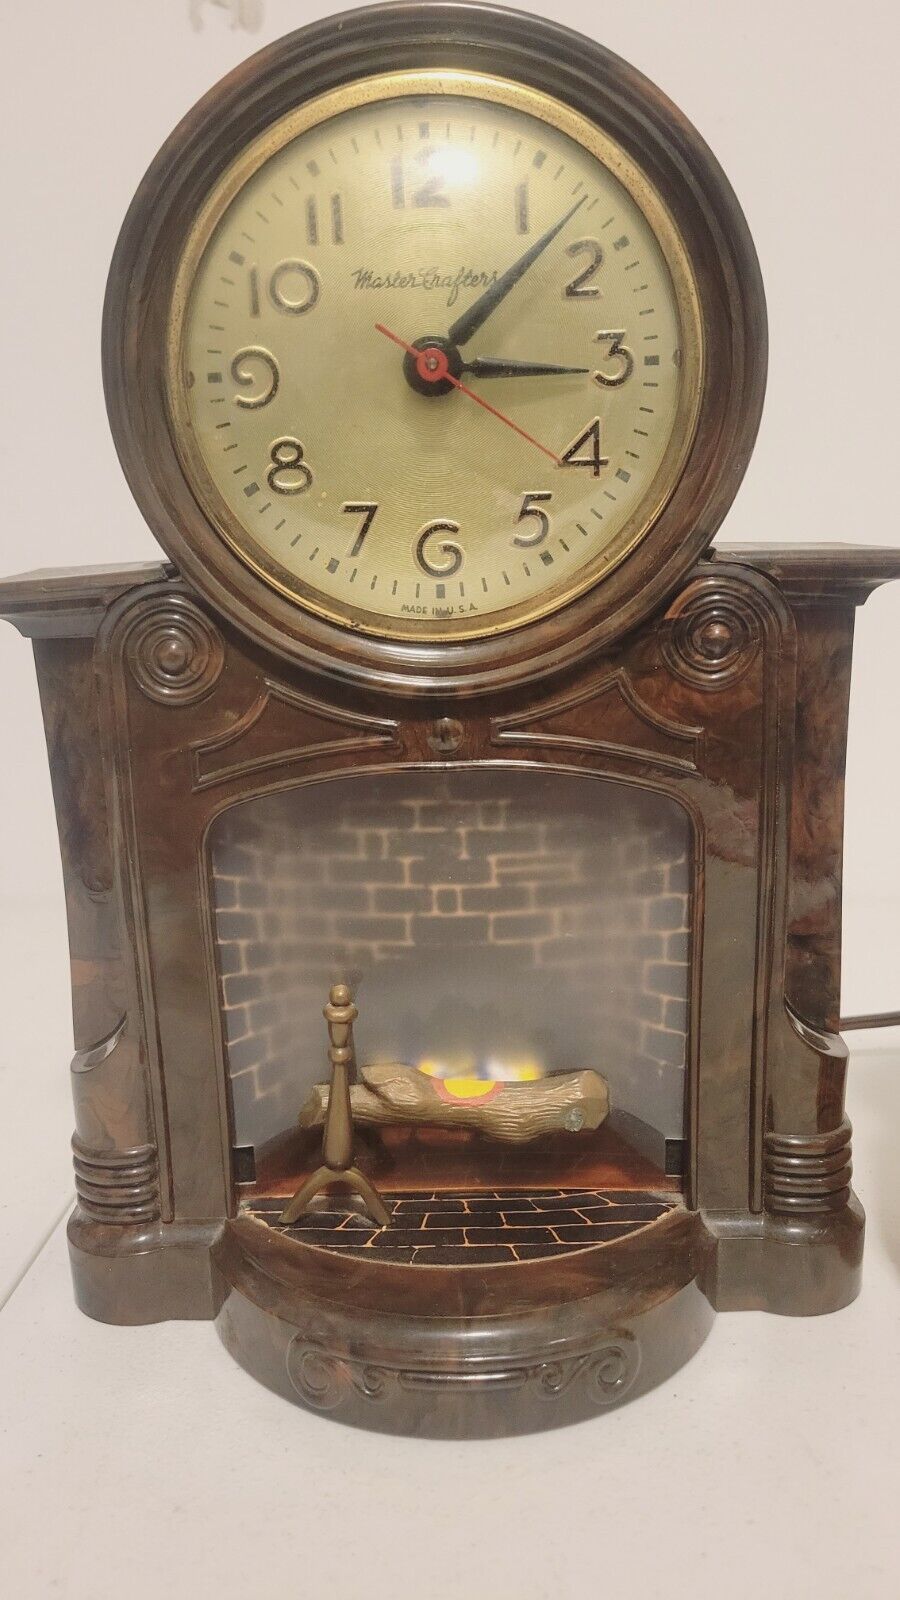 MasterCrafters Model 272clock Works. Fireplace Light Needs Replaced. Made In USA